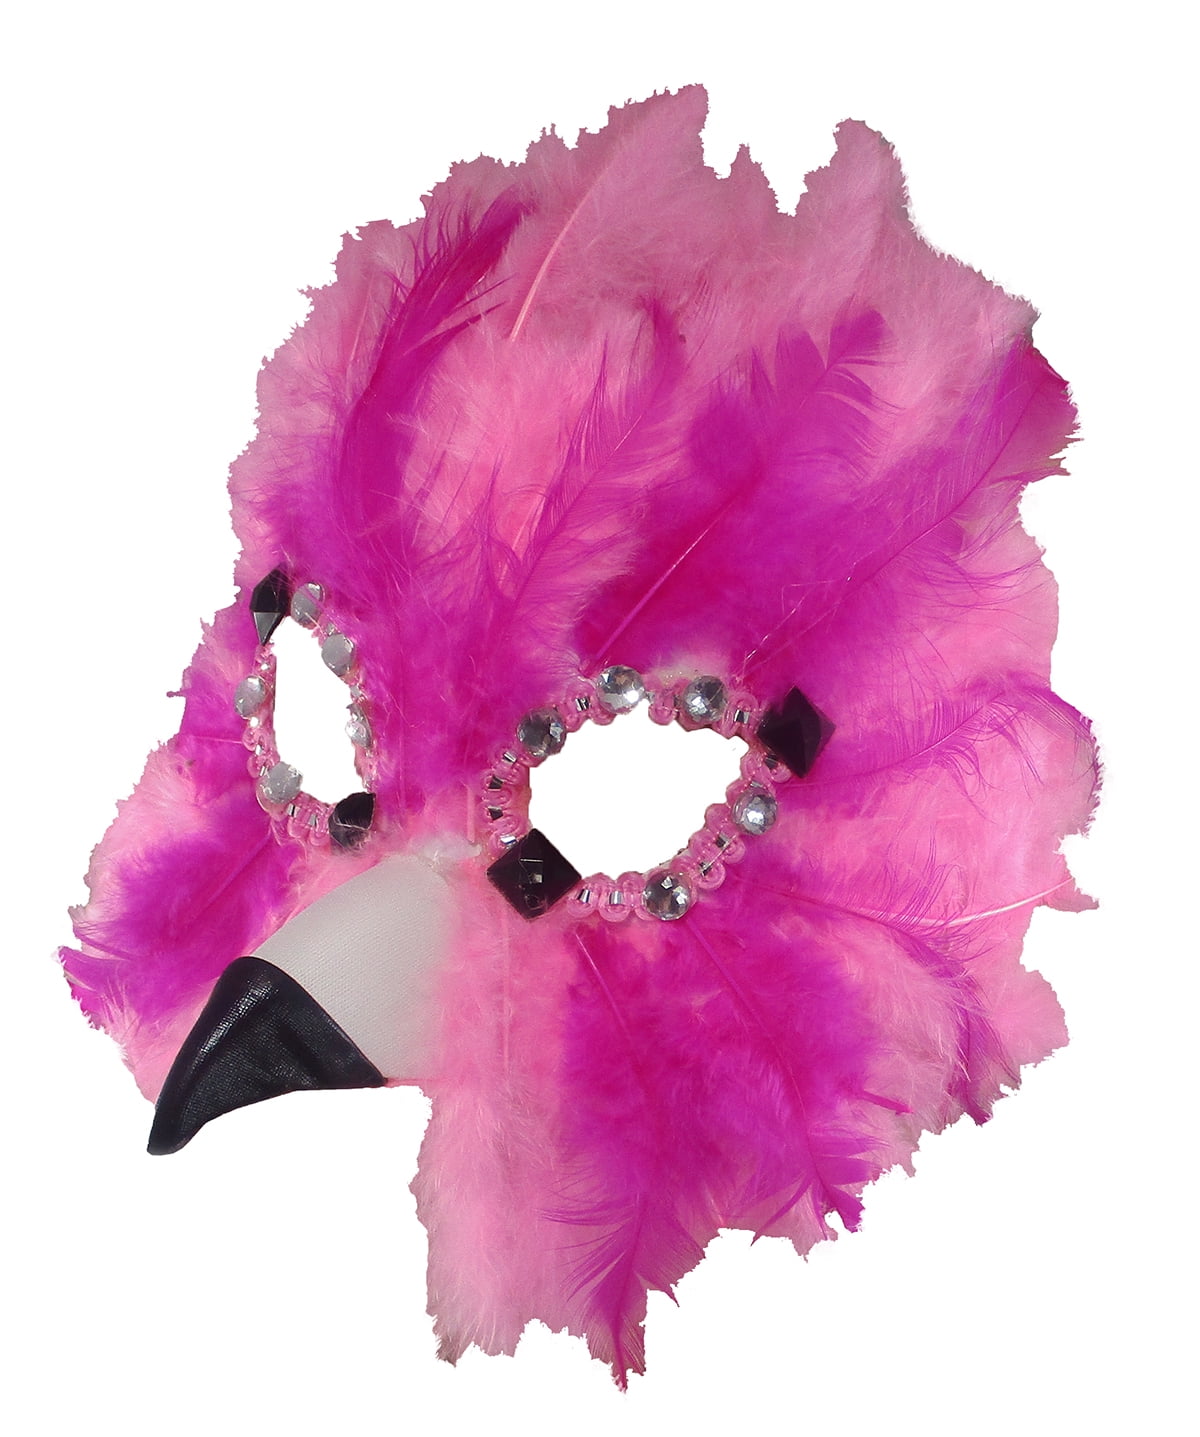 Masquerade Feathered Mask Gras Costume Half Mask, One Size, Pink - Walmart.com